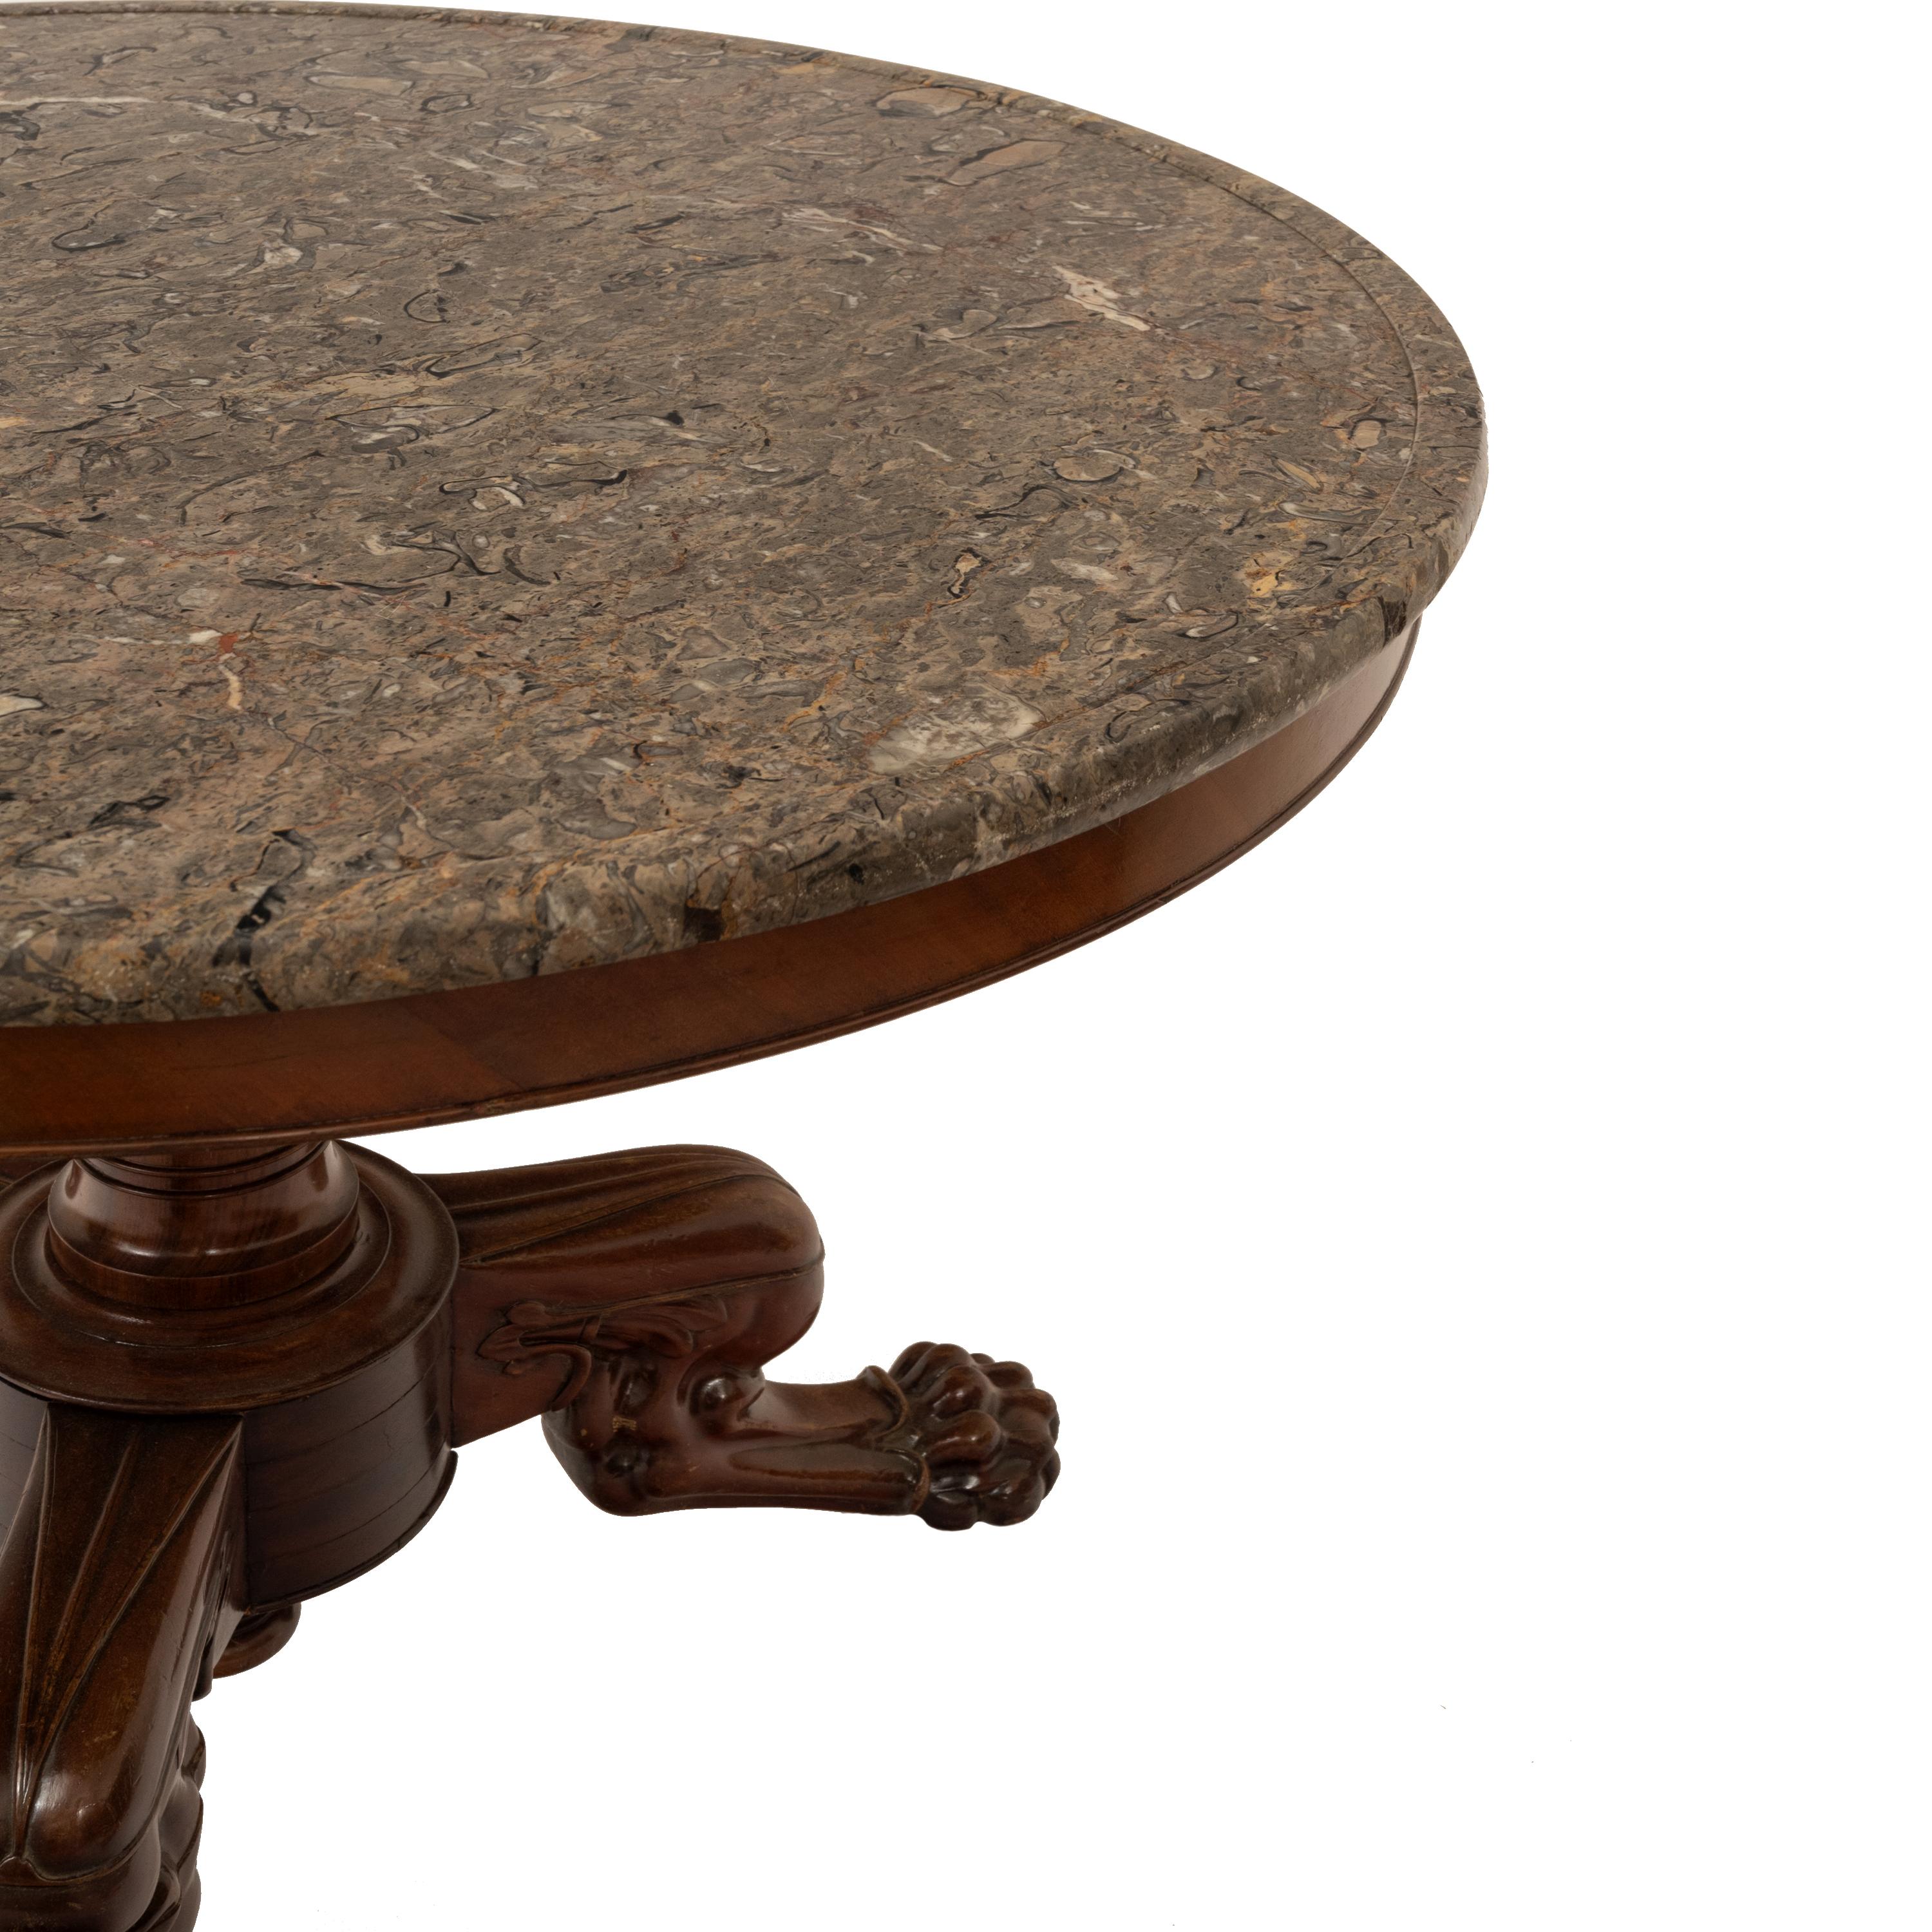 Antique French Louis Philippe Marble Top Carved Mahogany Round Tripod Table 1850 4